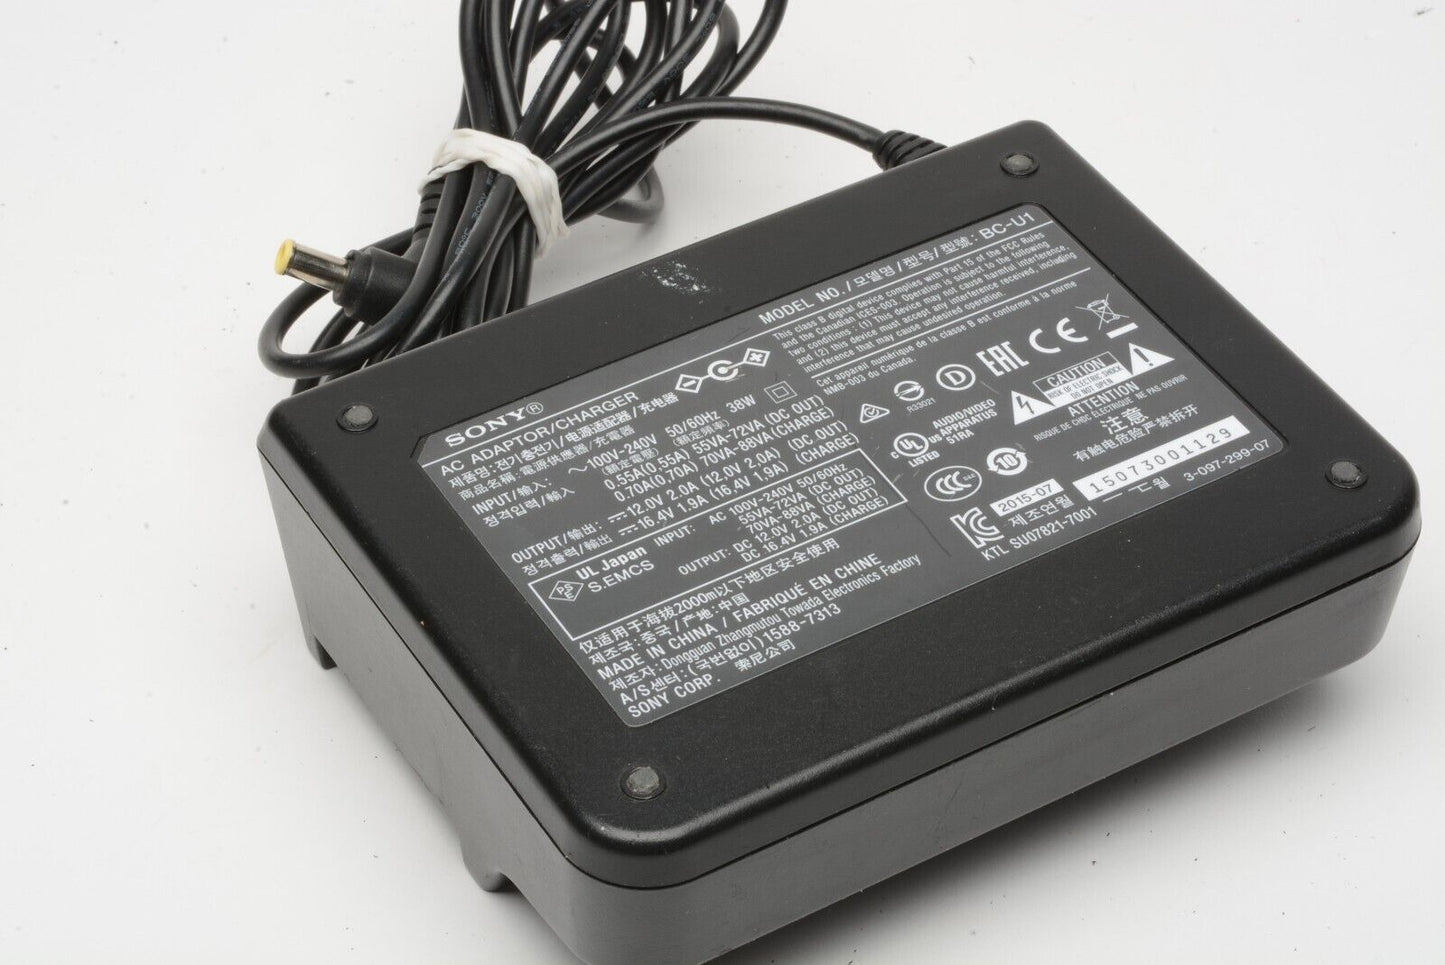 EXC++ SONY BC-U1 BATTERY CHARGER / AC ADAPTER w/POWER CORD, TESTED